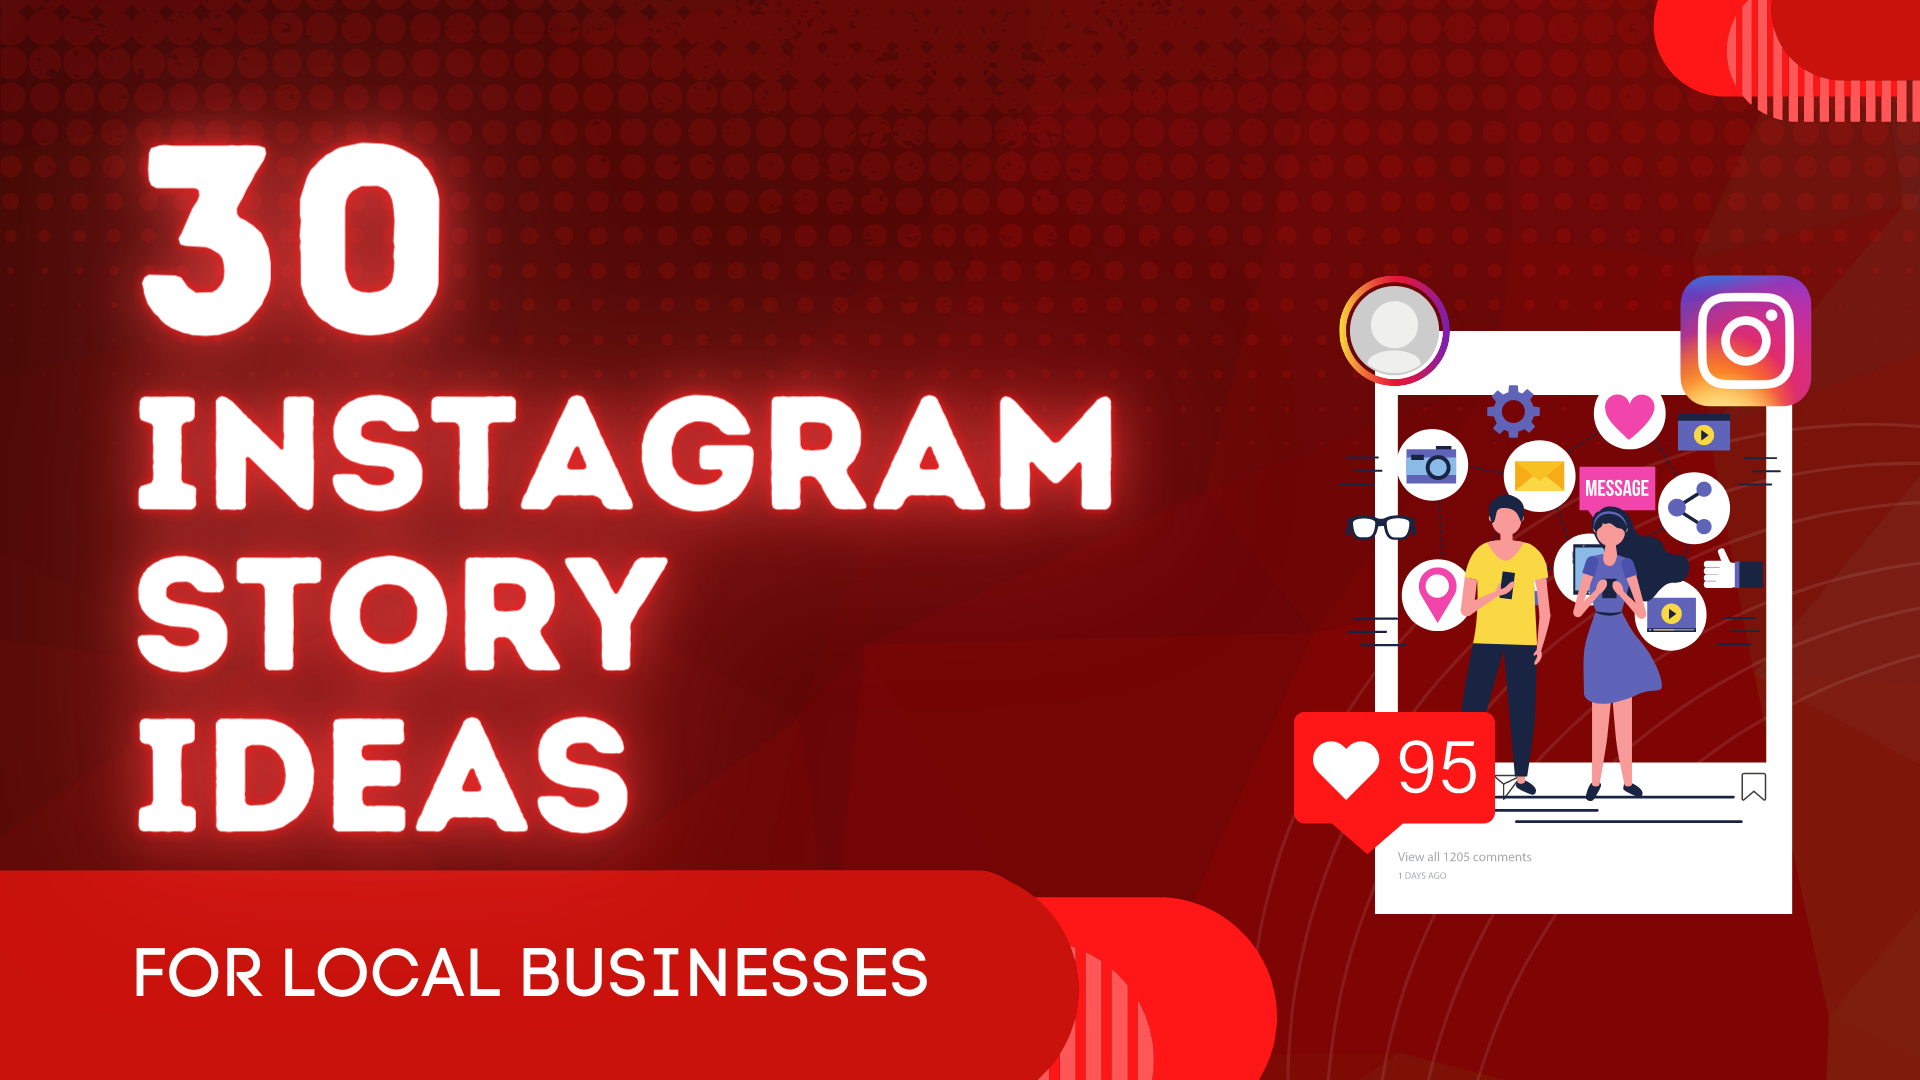 30 Instagram Story Ideas for Your Local Business